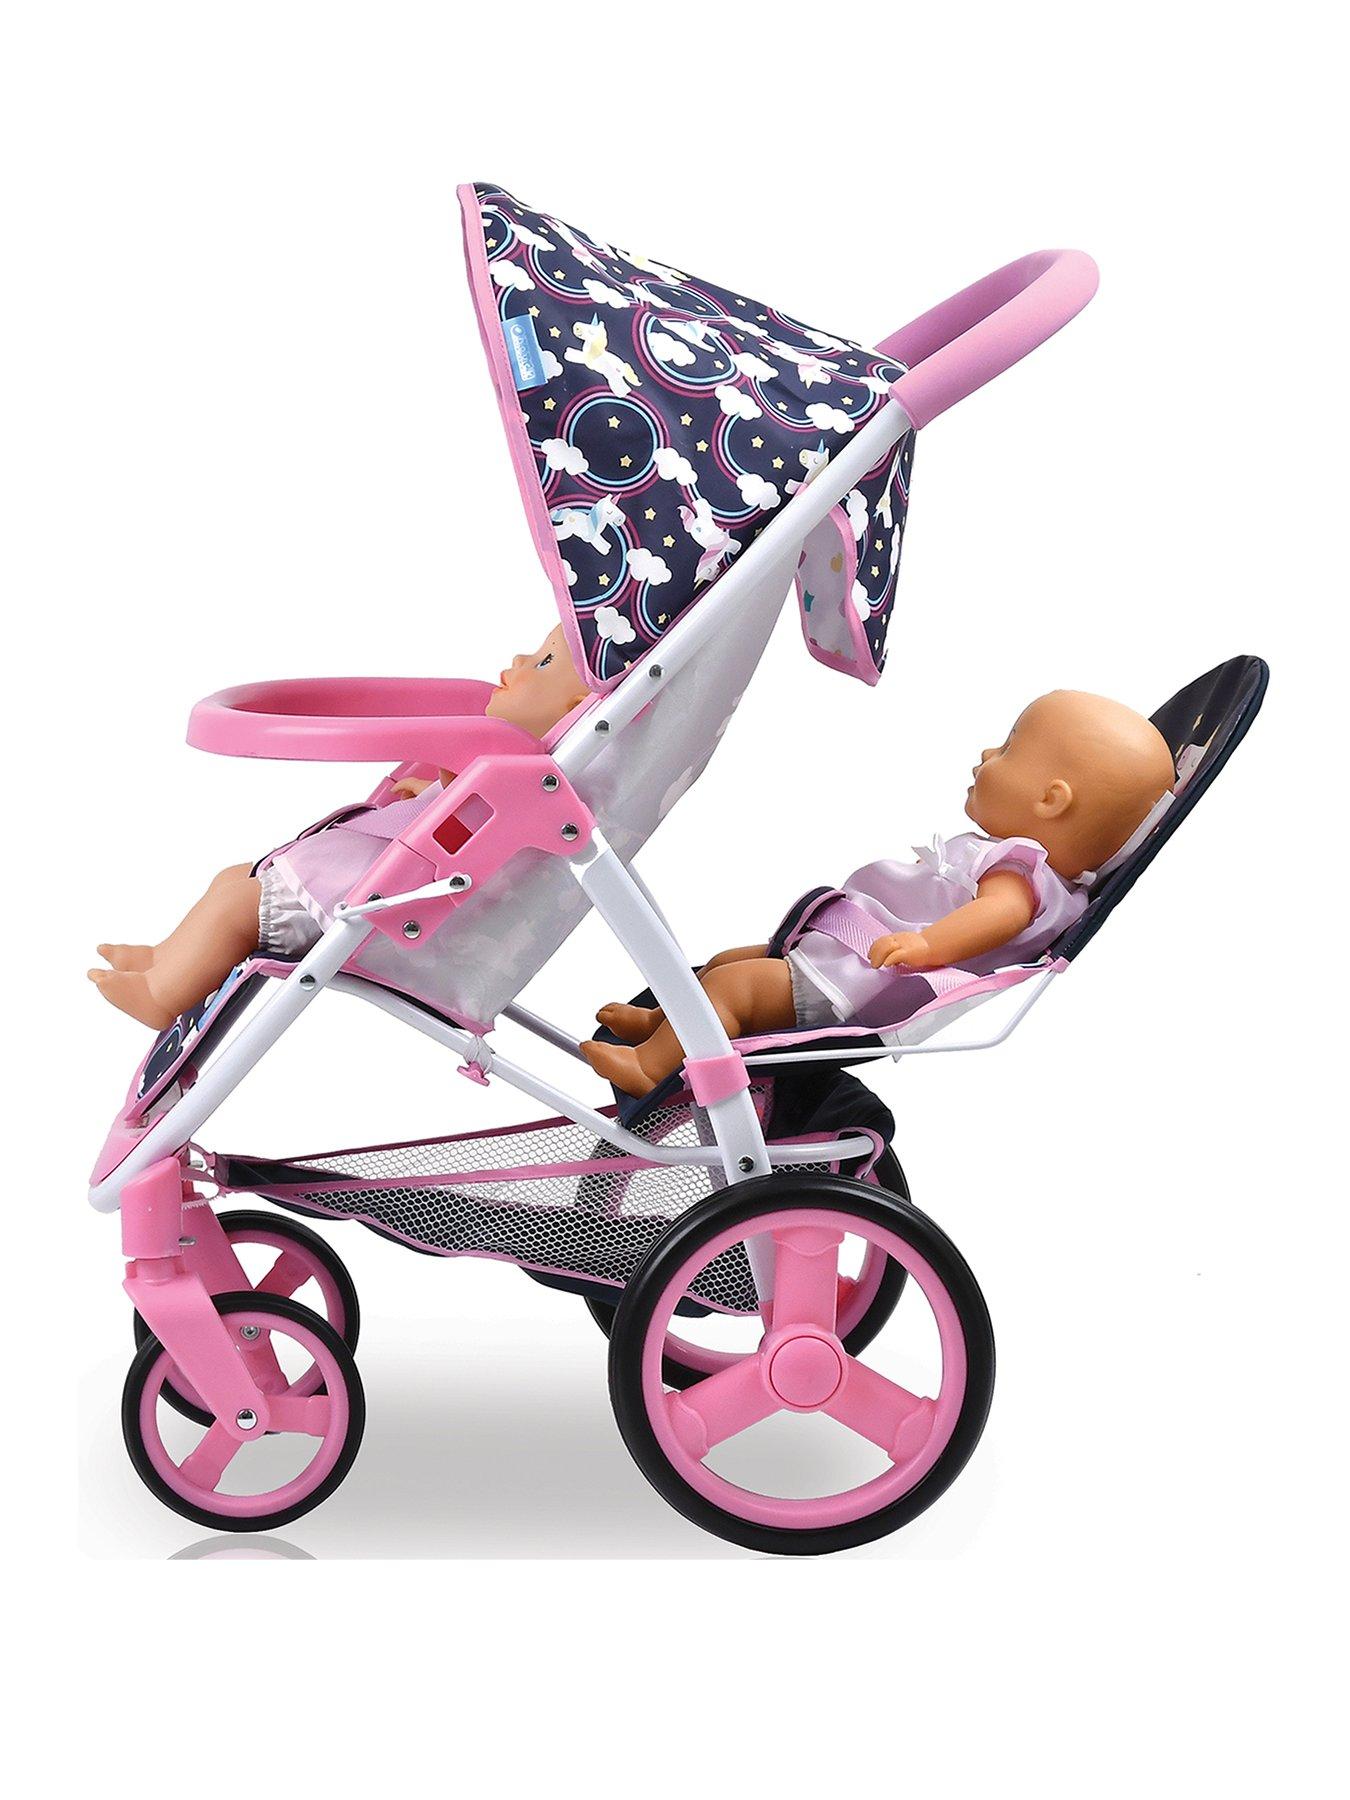 doll and pram set for 2 year old